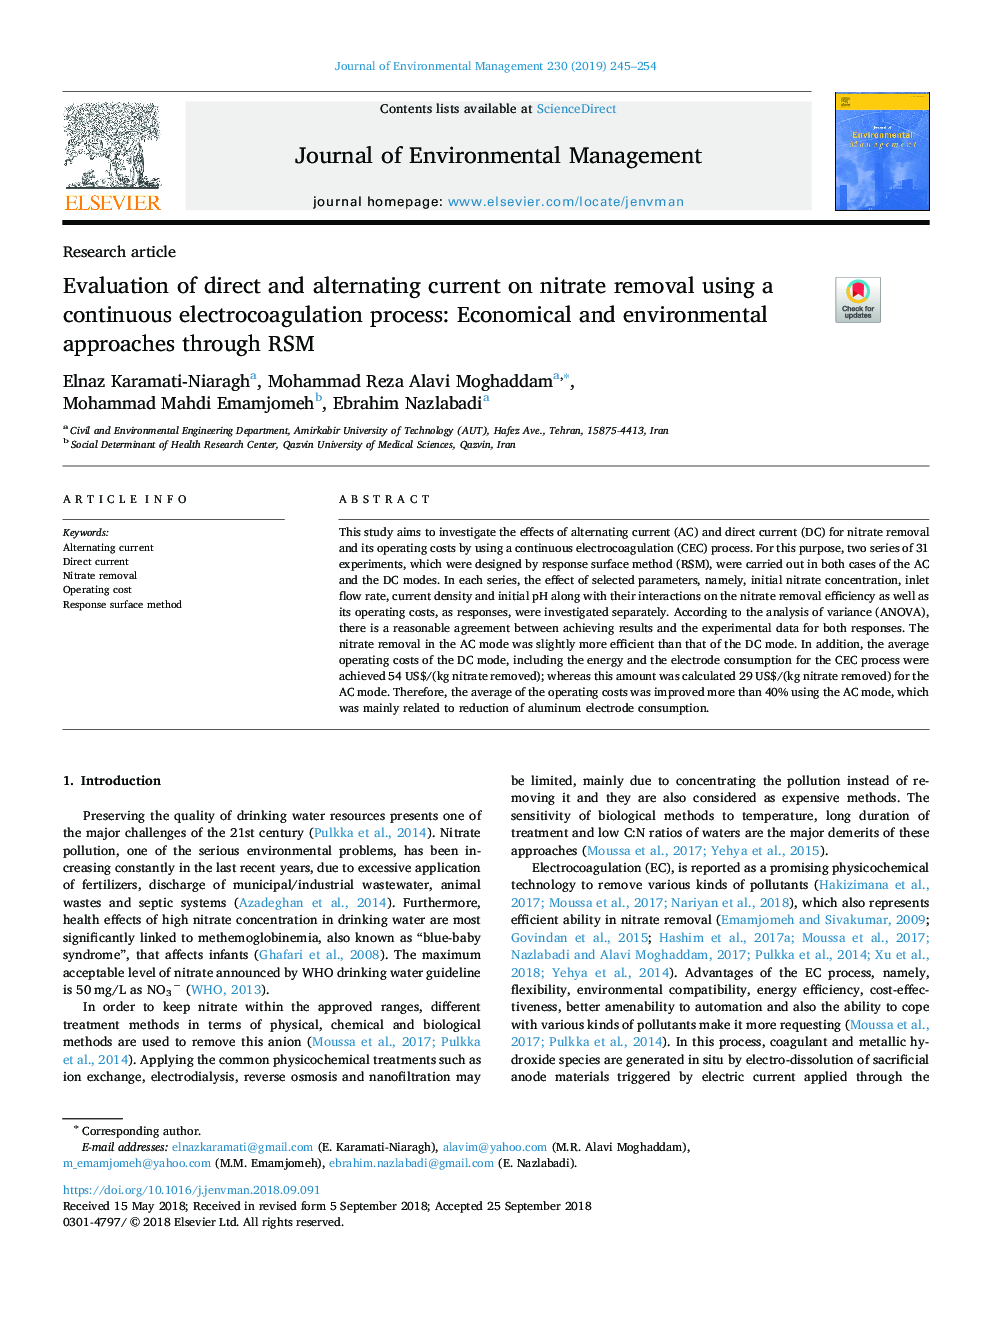 Evaluation of direct and alternating current on nitrate removal using a continuous electrocoagulation process: Economical and environmental approaches through RSM